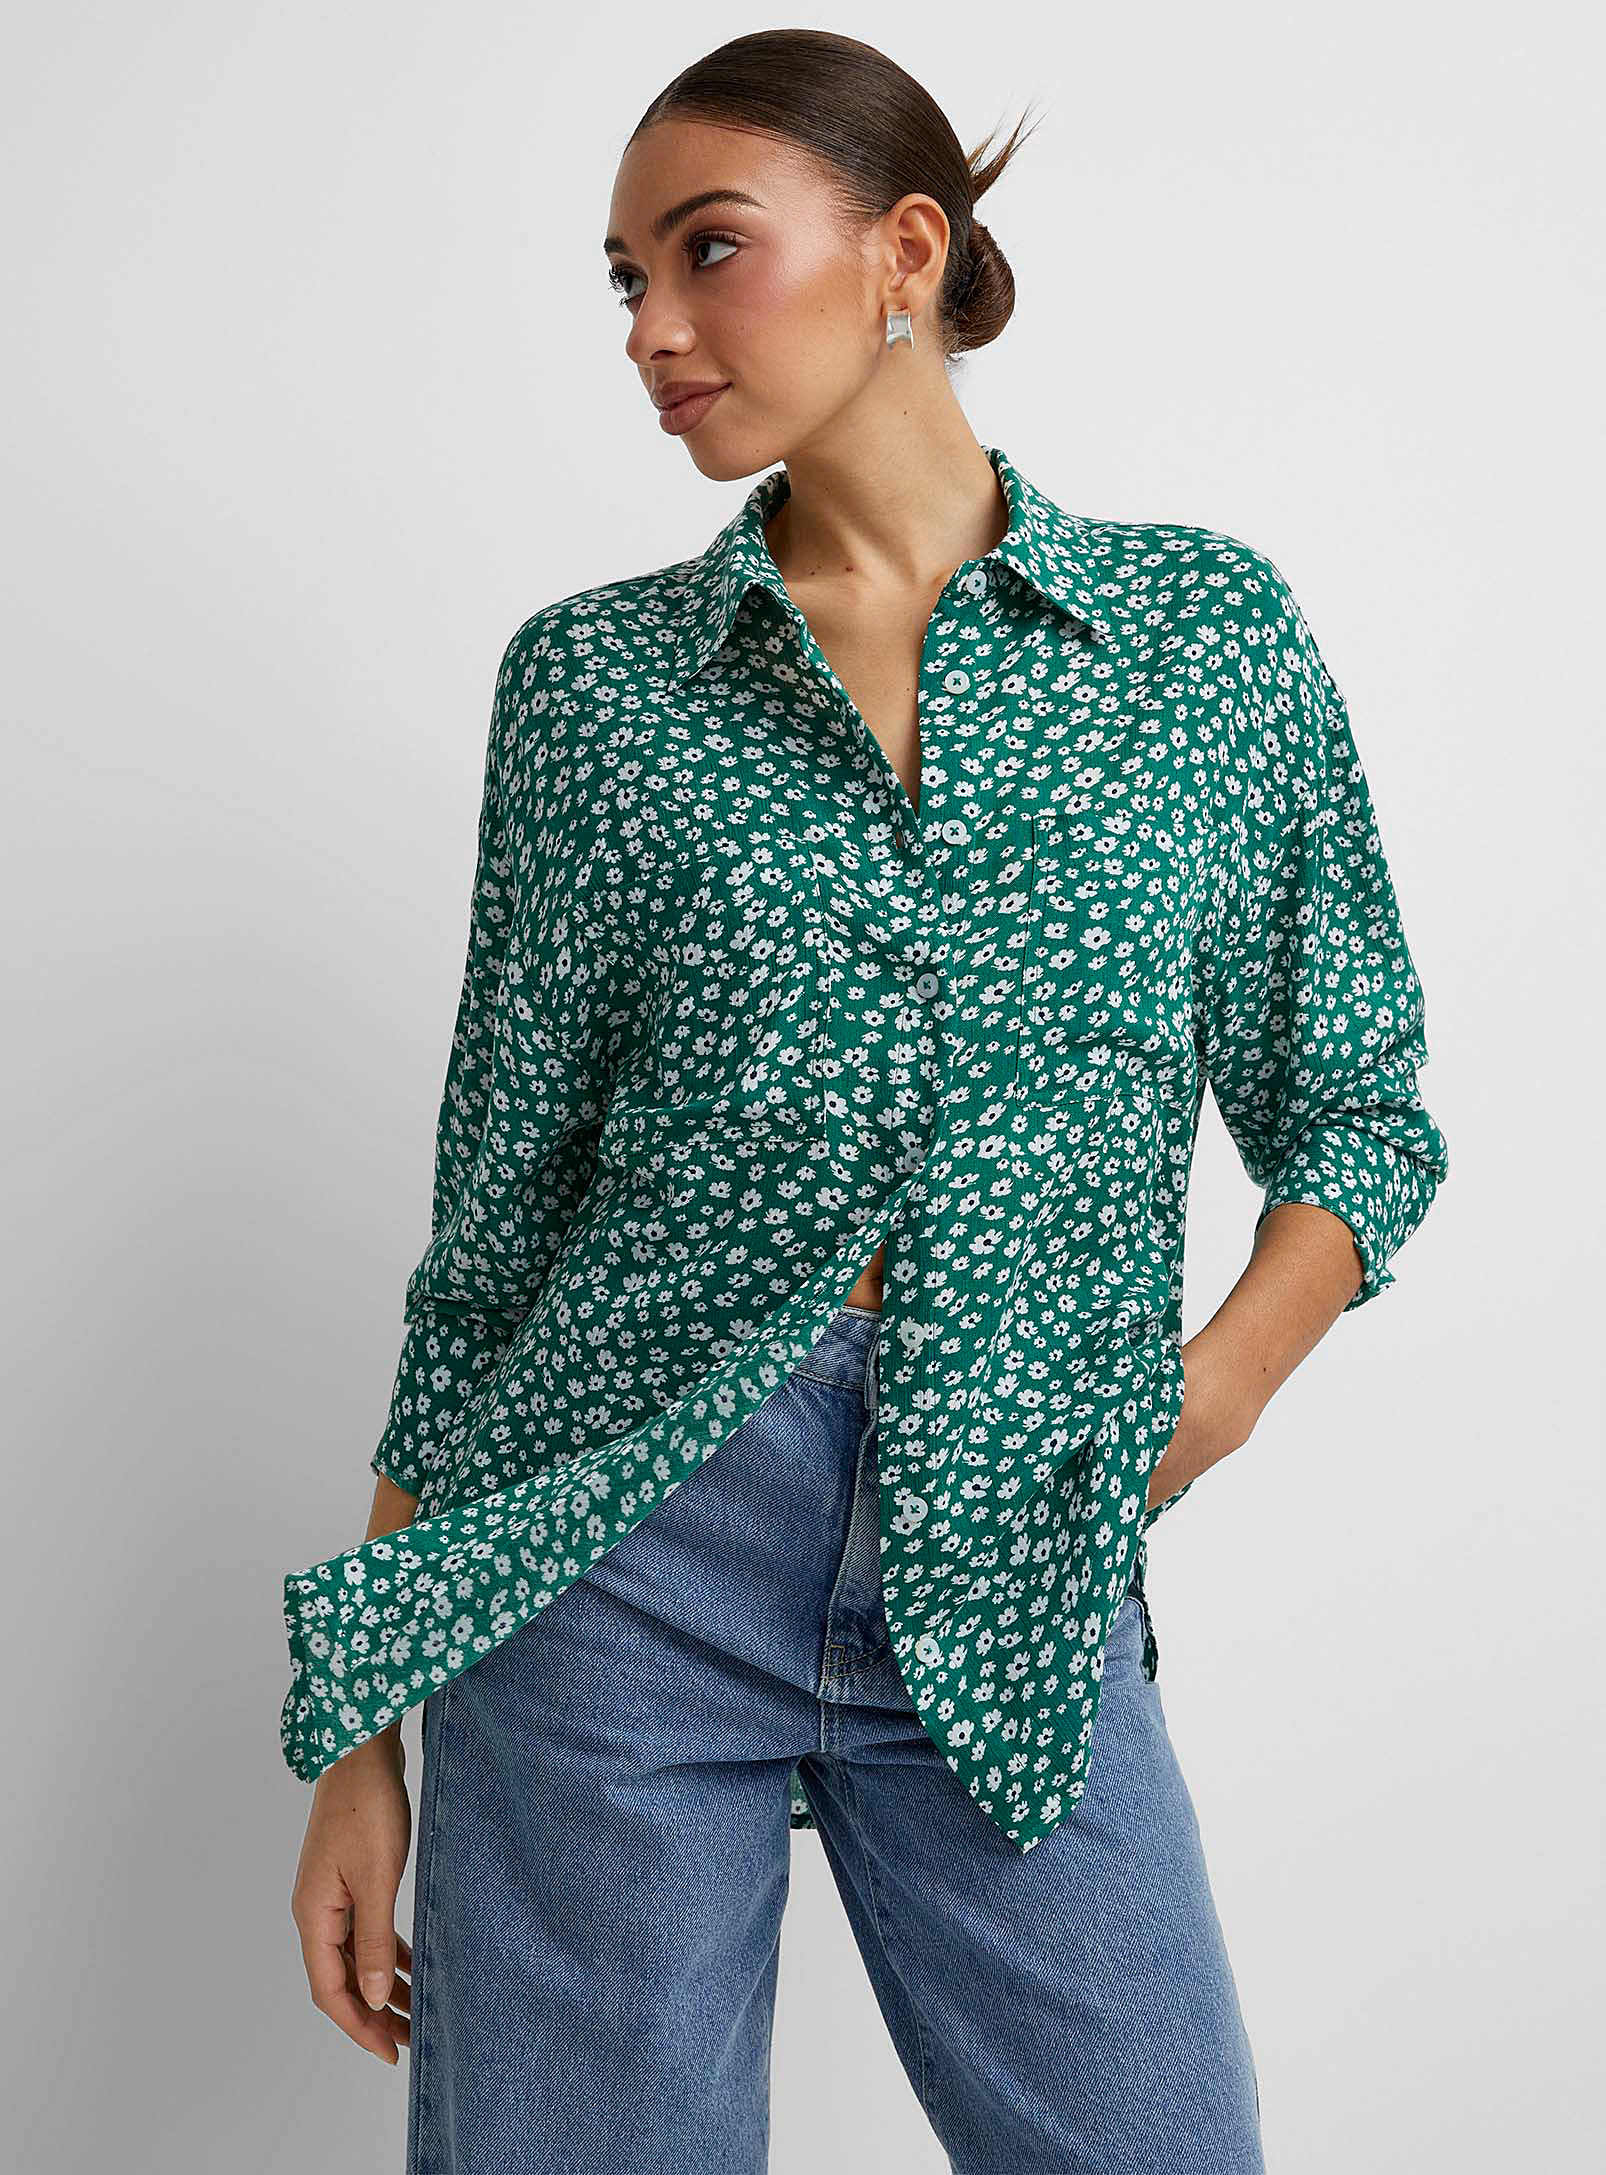 Icone Wrinkled Texture Printed Loose Shirt In Patterned Green